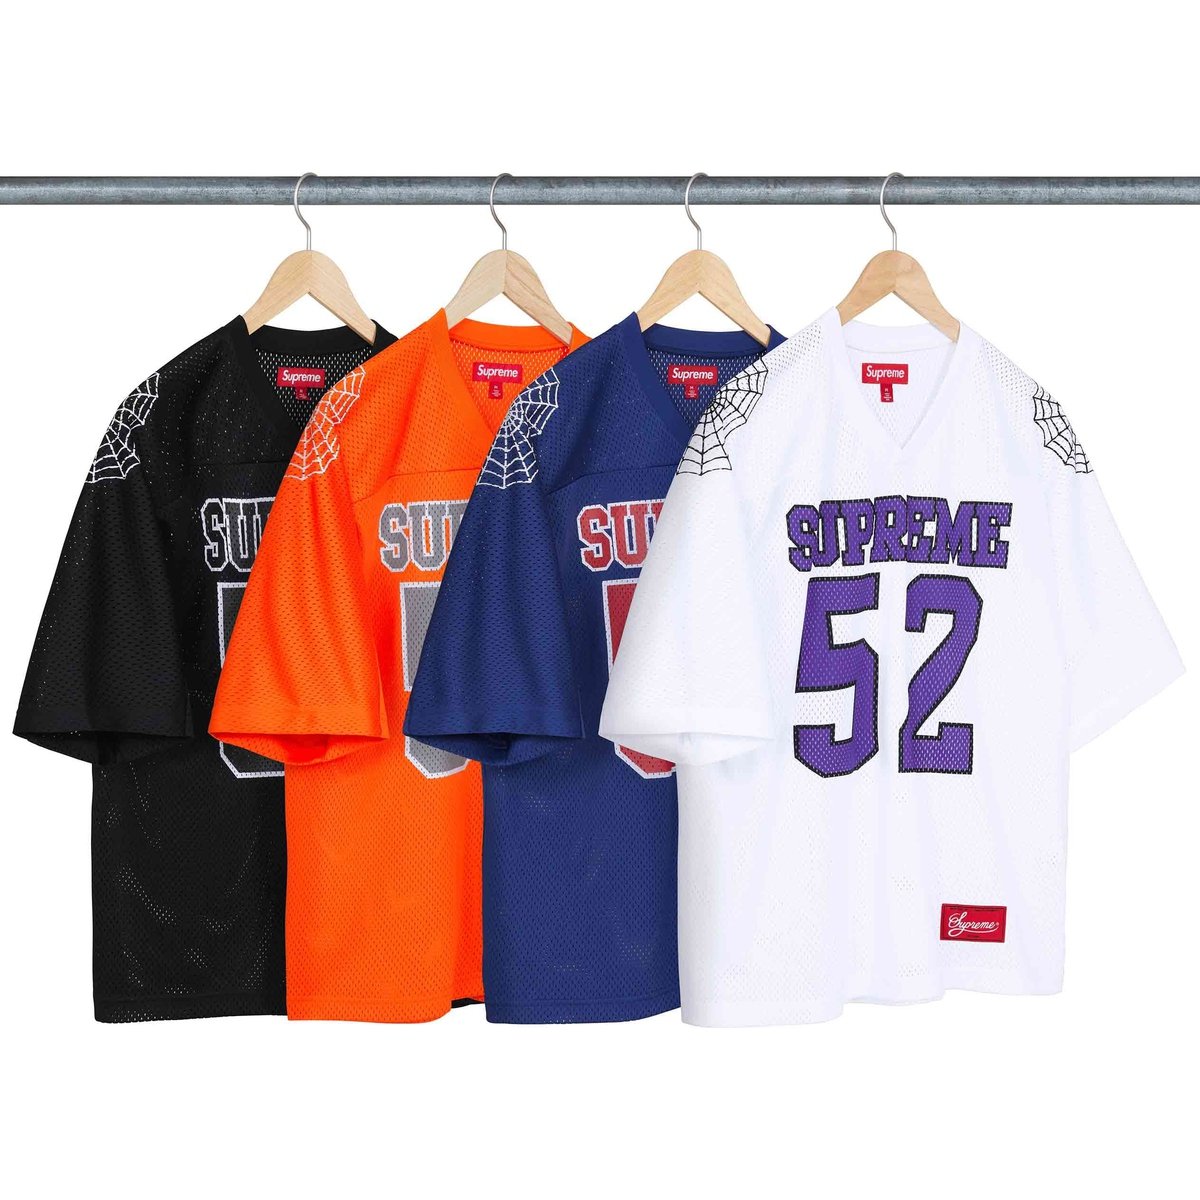 Supreme Spiderweb Football Jersey released during spring summer 24 season